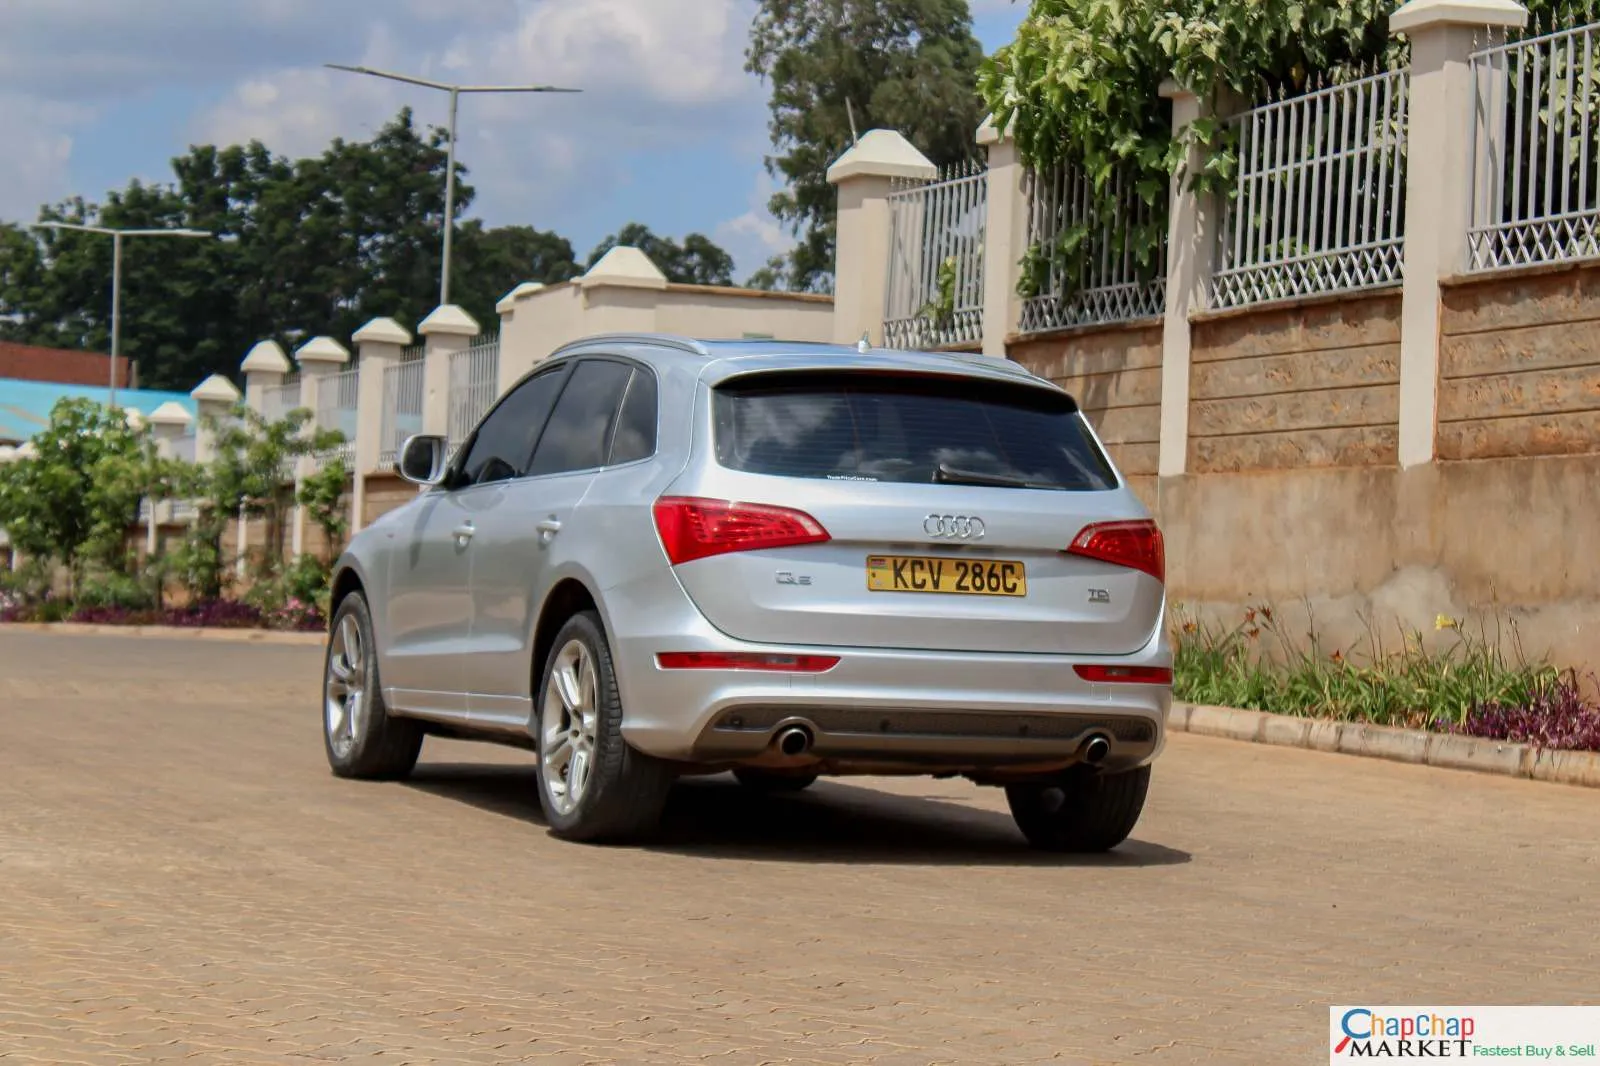 AUDI Q5 QUICK SALE You Pay 30% deposit Trade in Ok EXCLUSIVE AUDI Q5:for sale in kenya hire purchase installments 🔥